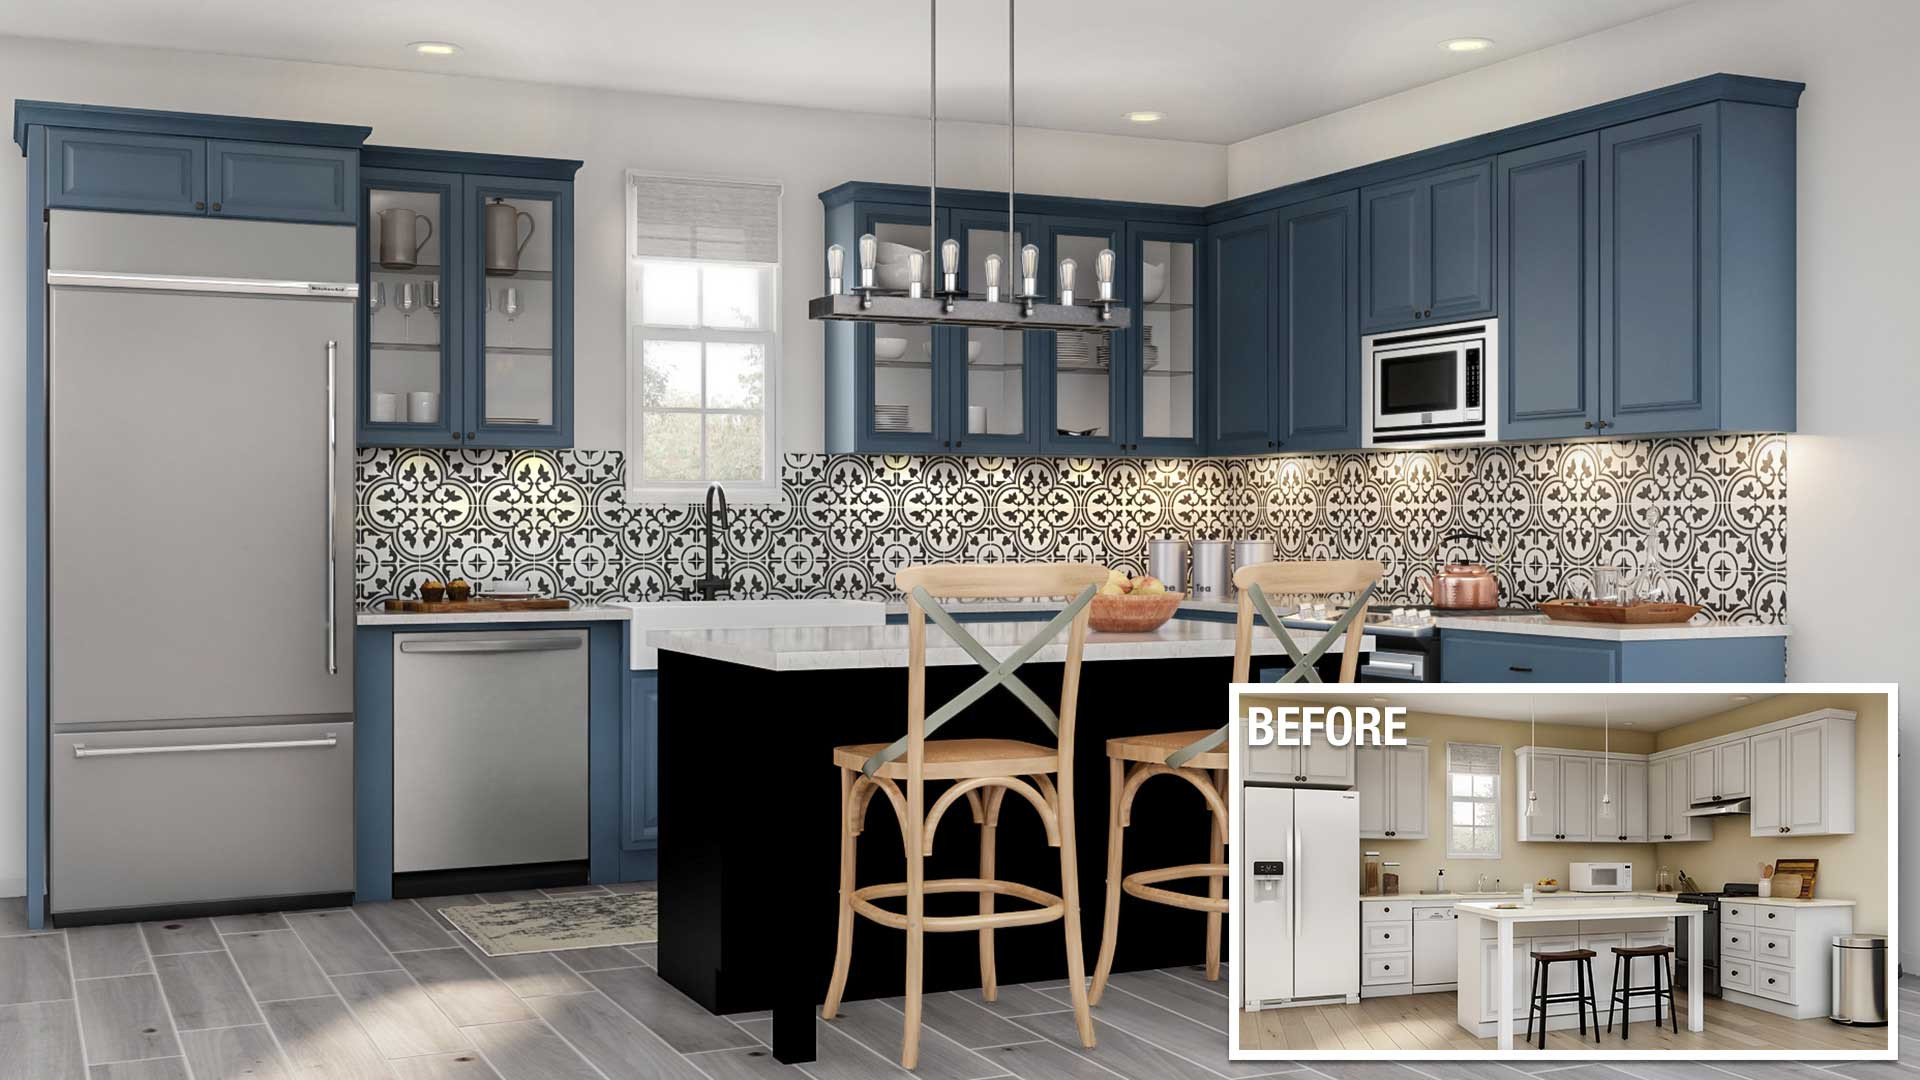 Typical Kitchen Remodel Cost
 Cost to Remodel a Kitchen The Home Depot